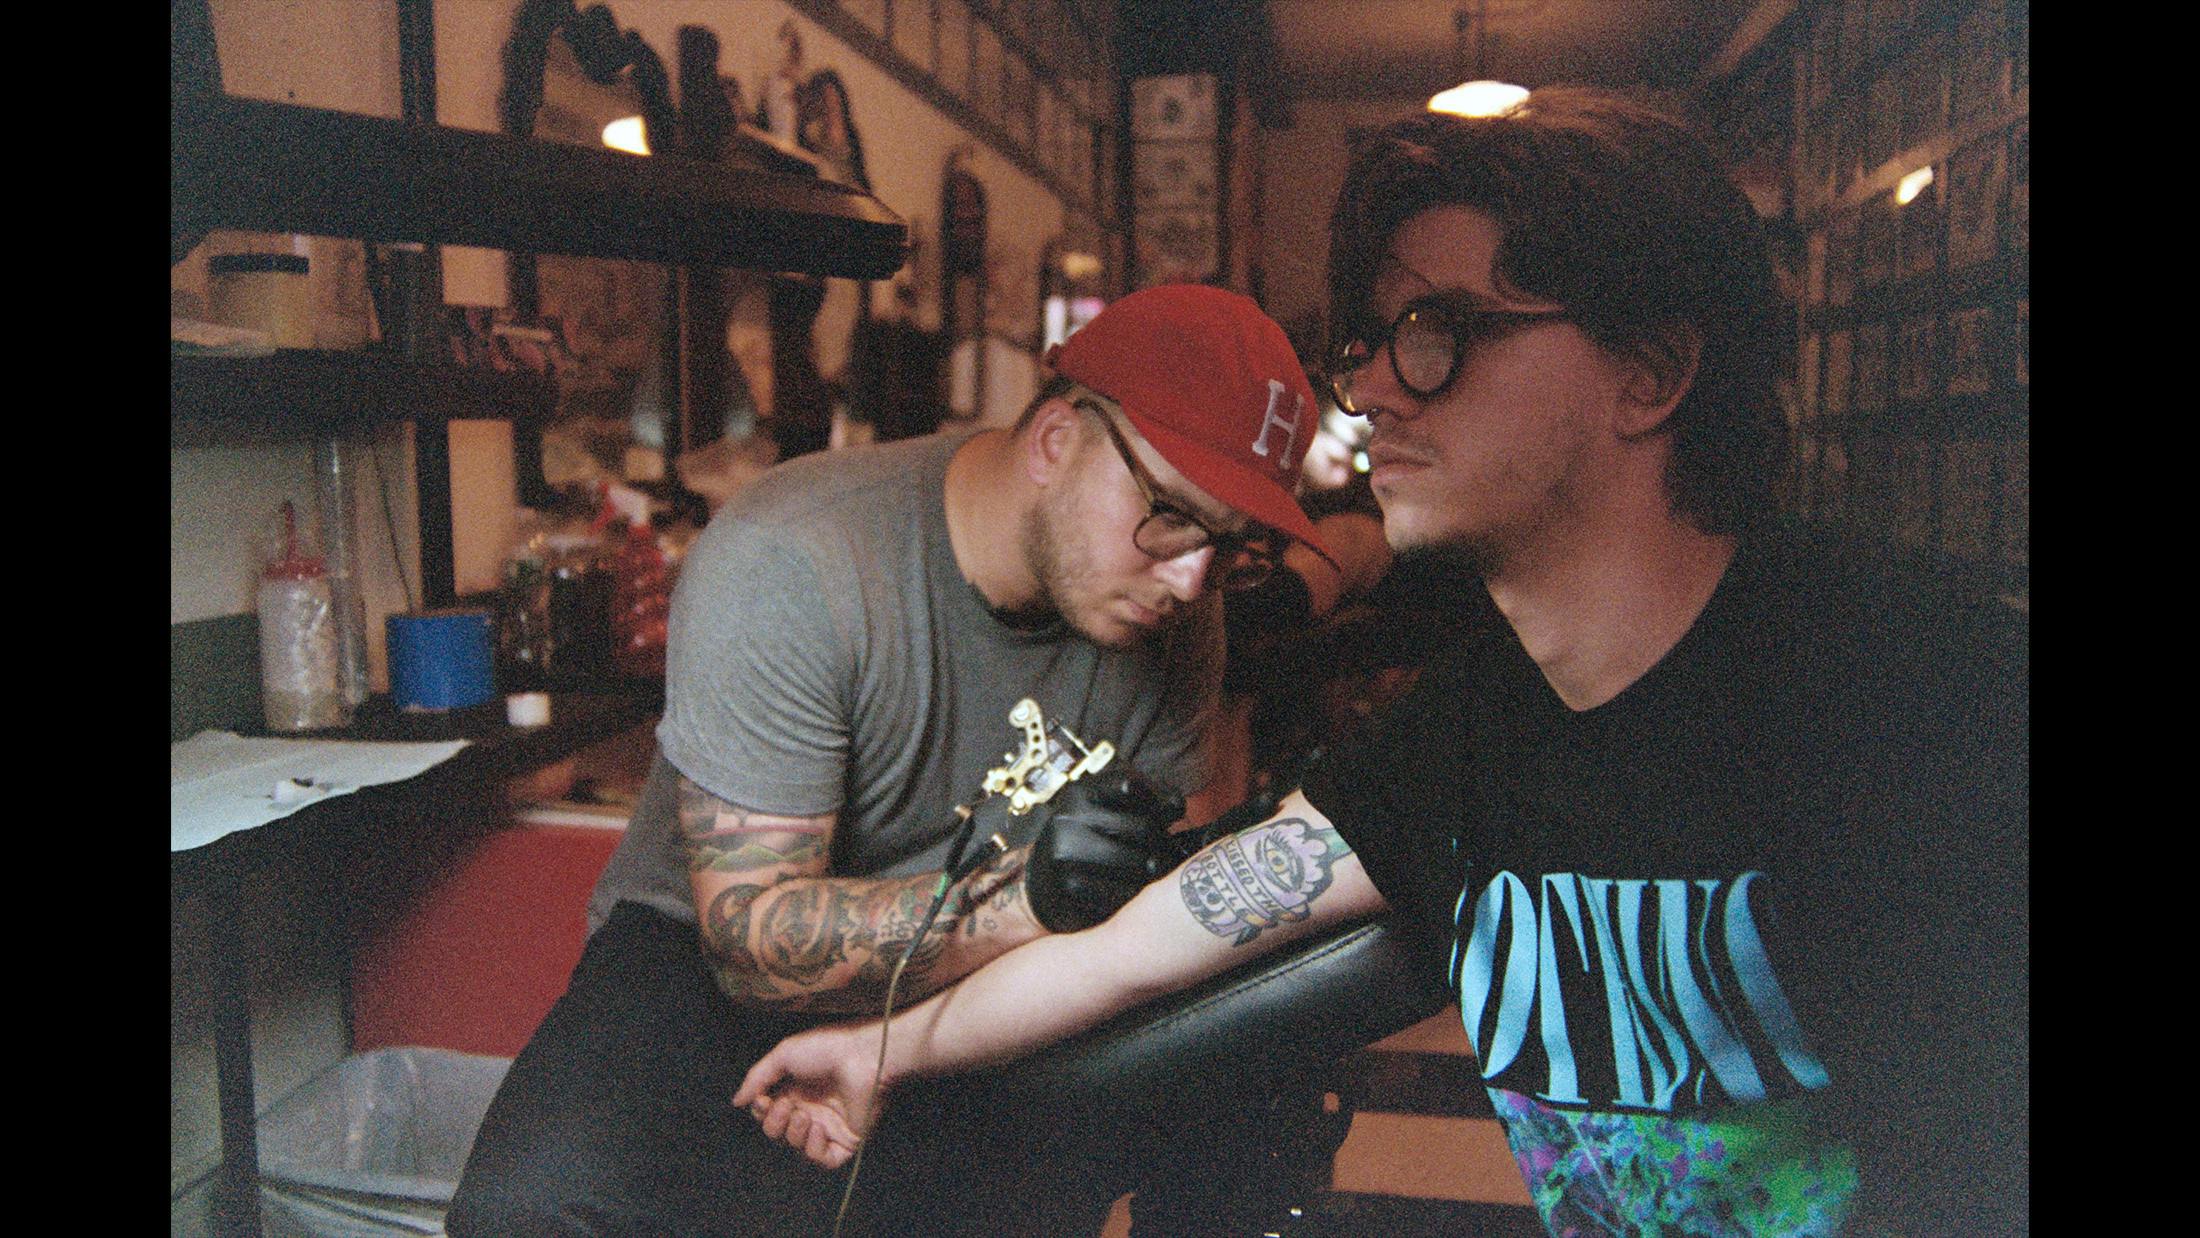 Our summer tour with Nothing ended in NYC, and we had a couple days to chill before heading back to San Francisco. Our friend Nick from California had moved to NYC a few months before this to tattoo at this rad shop. So after the last show of the tour, a couple of us got Nothing tattoos to commemorate the summer. This is Stain getting his.